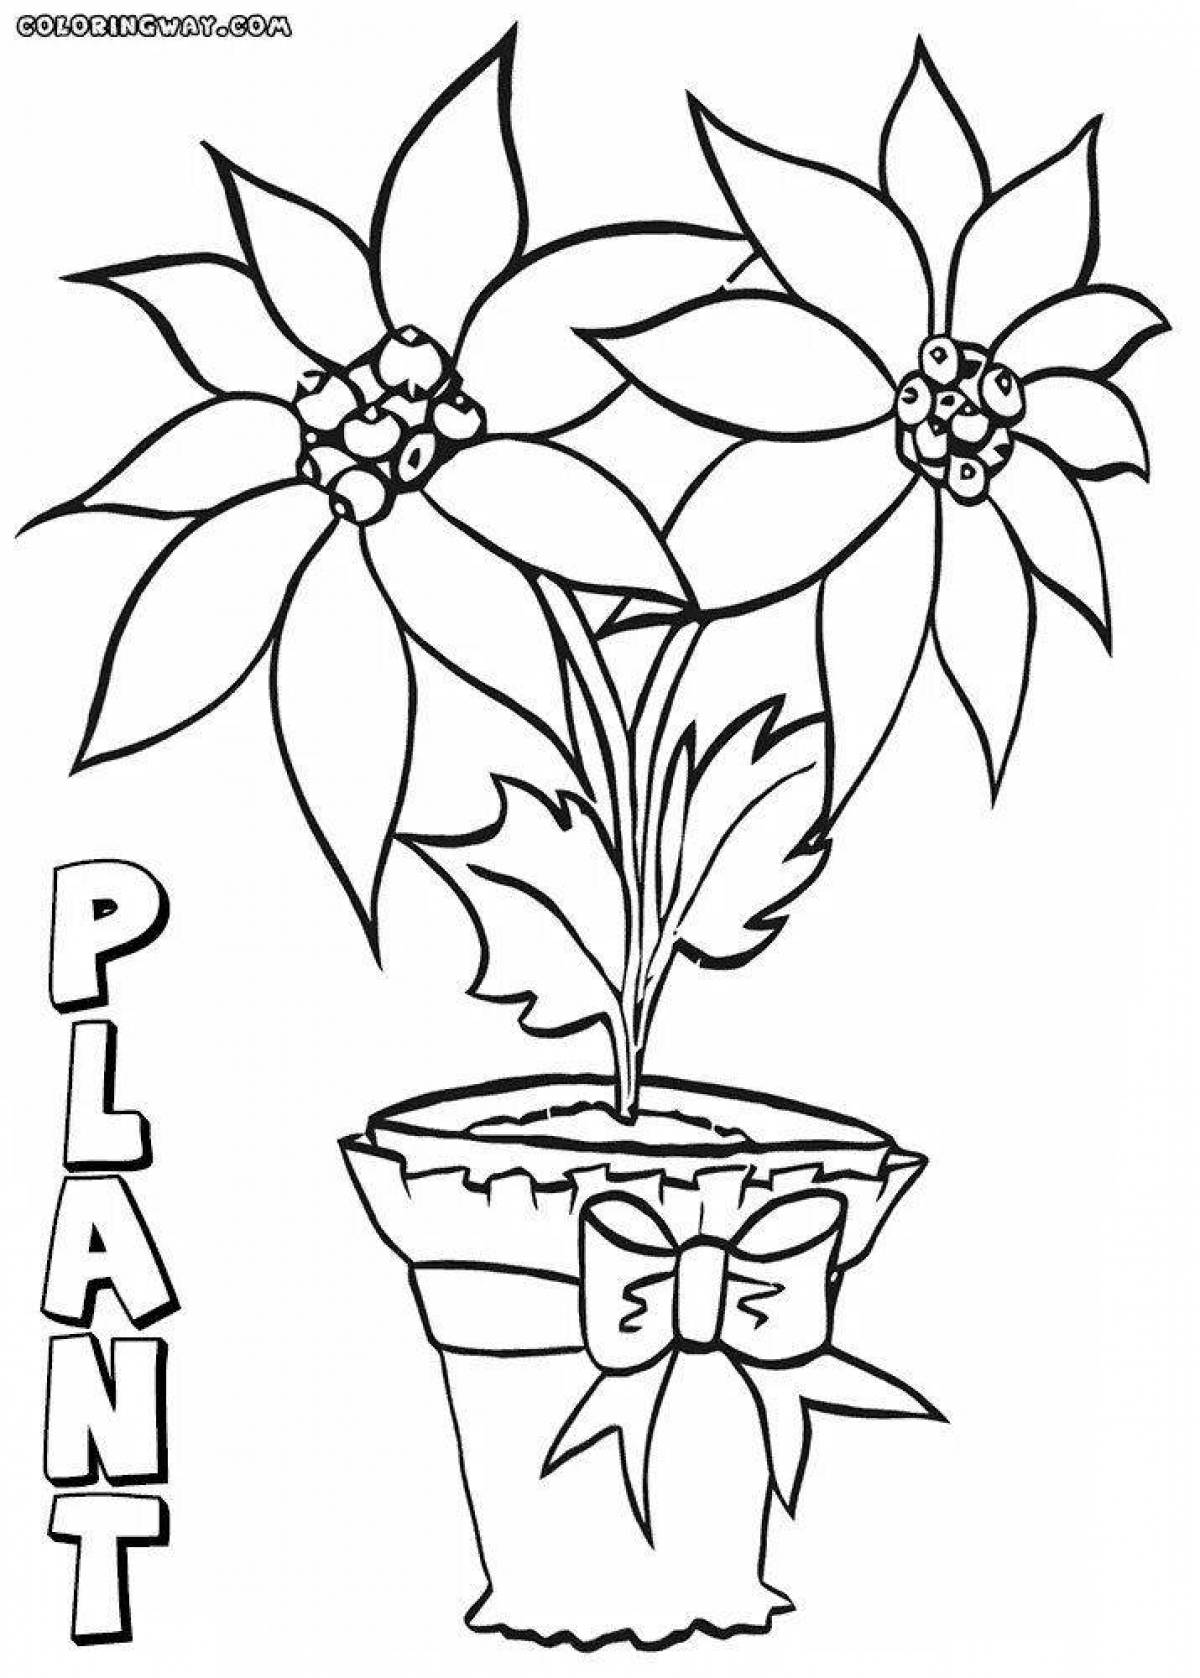 Coloring page wonderful indoor plant for children 4-5 years old